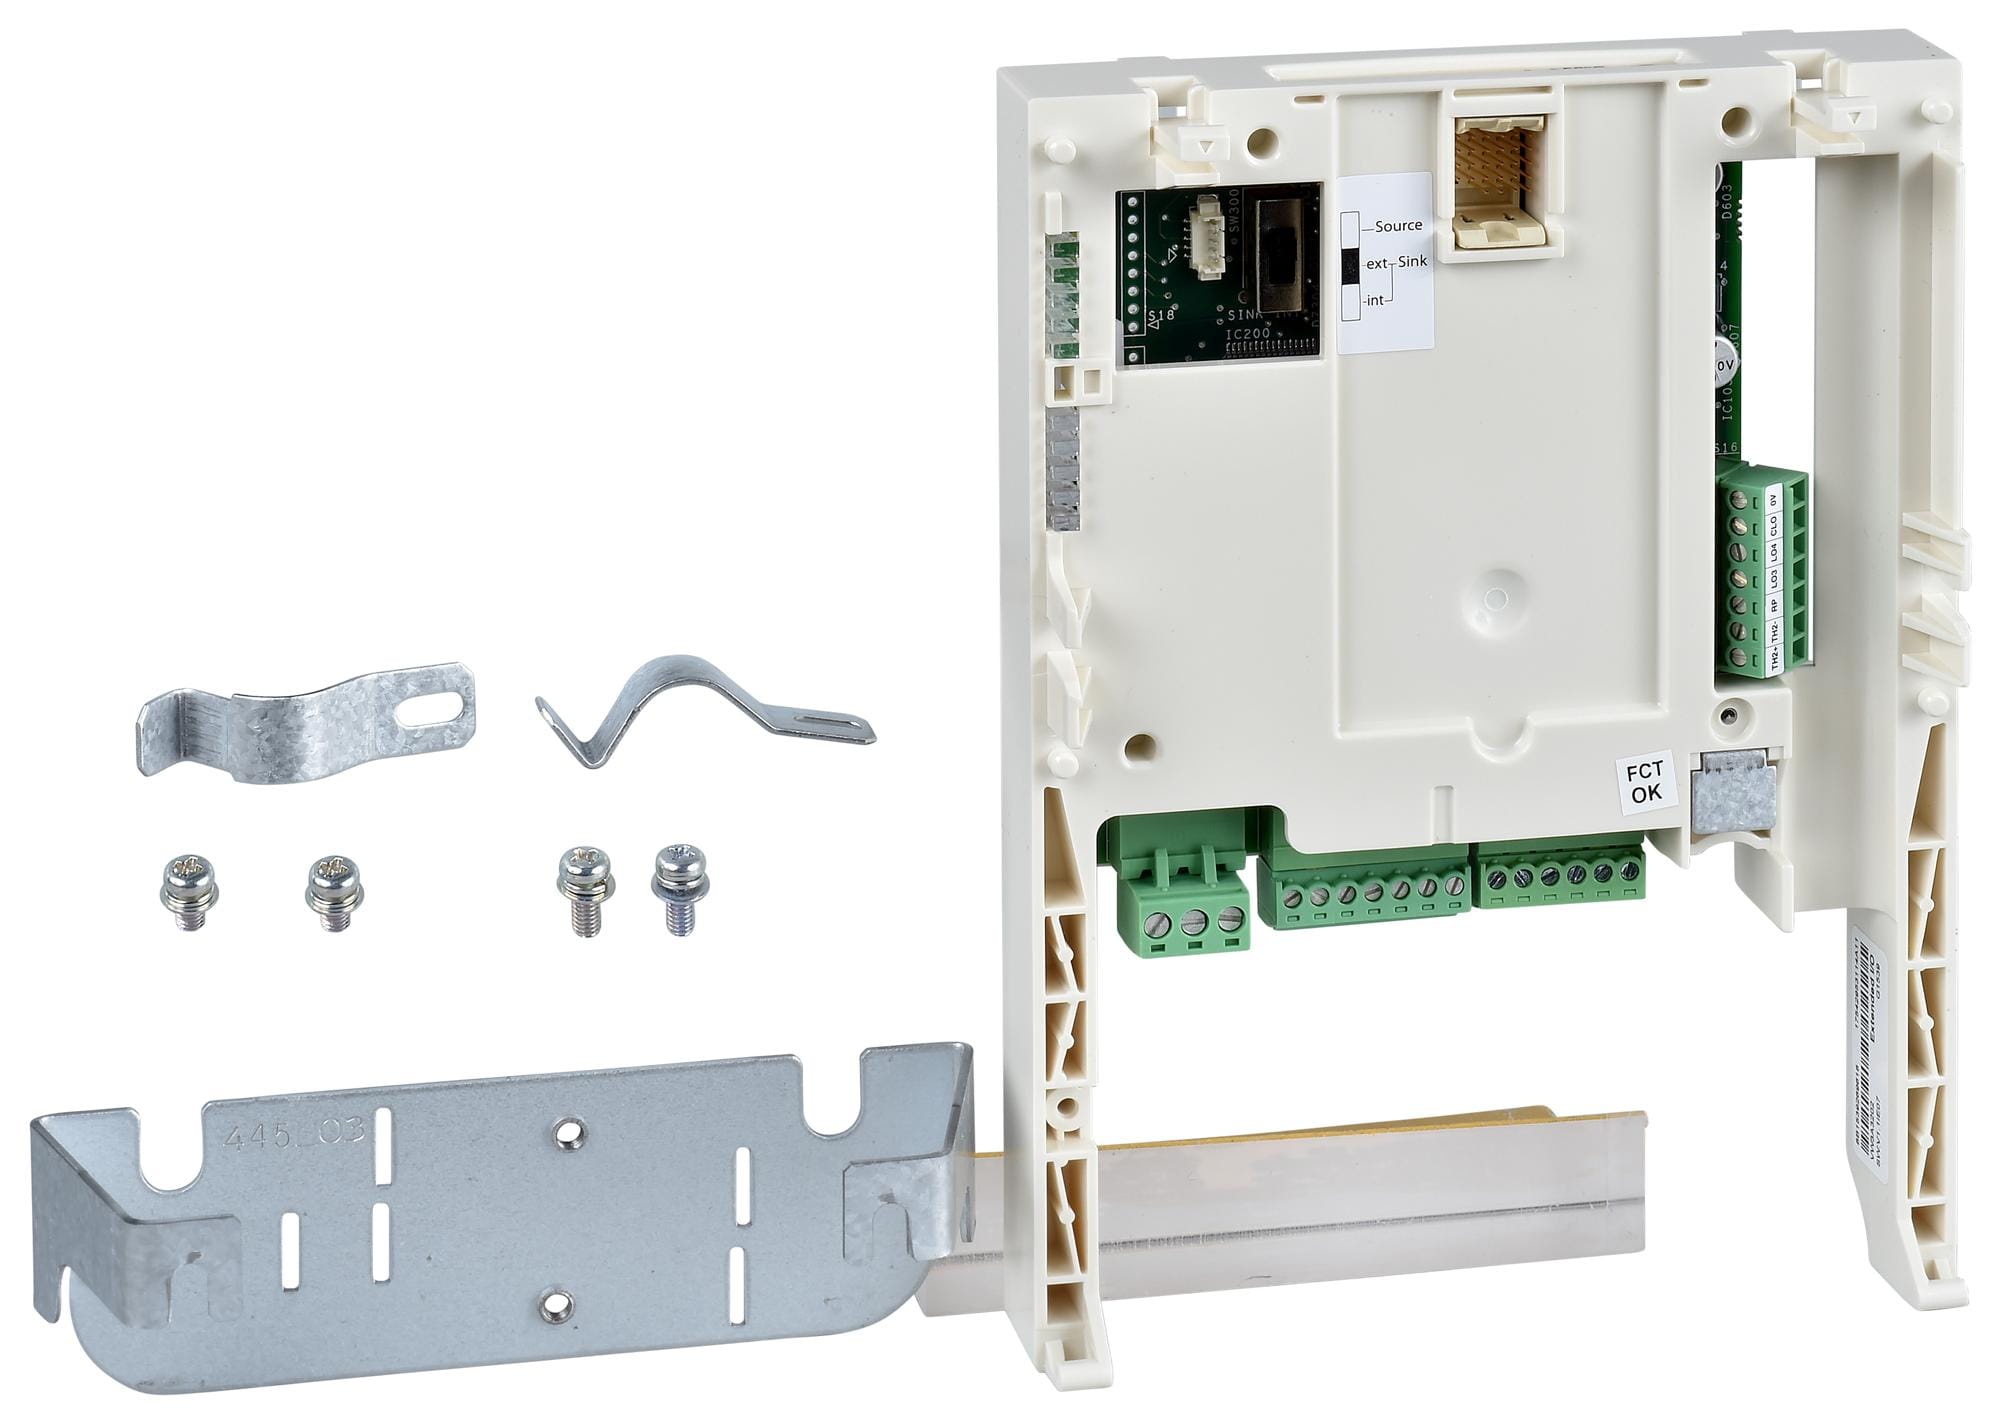 SCHNEIDER ELECTRIC Accessories VW3A3201 LOGIC I/O CARD, VARIABLE SPEED DRIVE SCHNEIDER ELECTRIC 3110668 VW3A3201